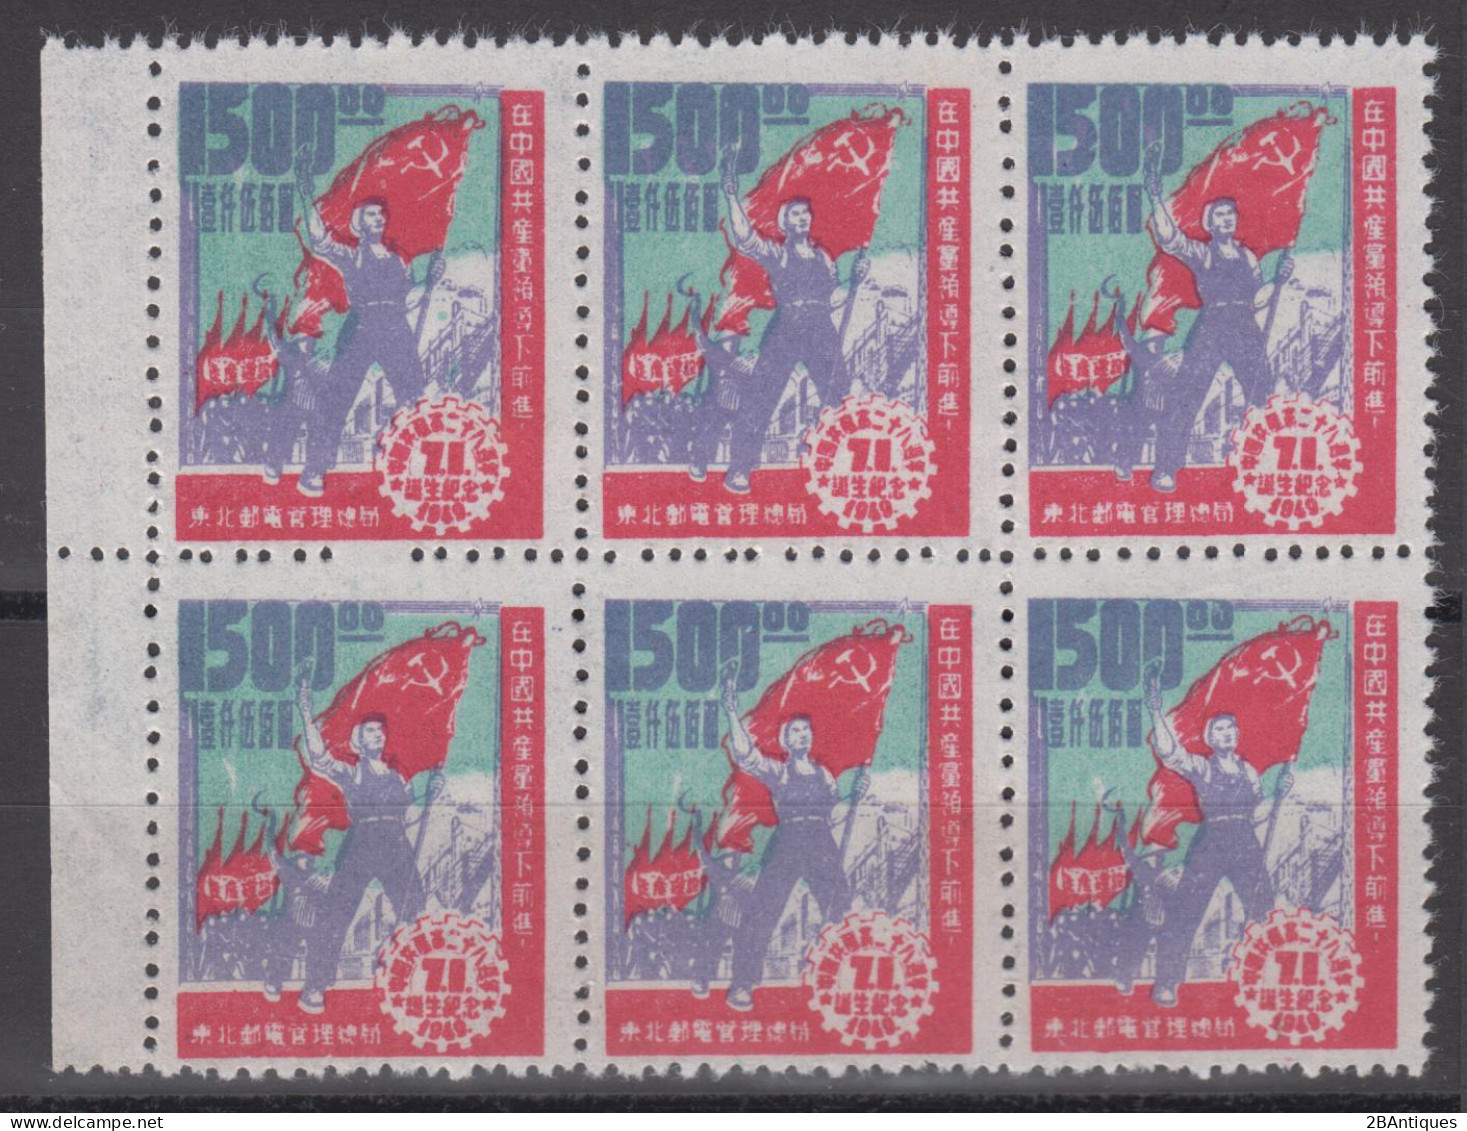 NORTHEAST CHINA 1949 - The 28th Anniversary Of Chinese Communist Party BLOCK OF 6! - Noordoost-China 1946-48